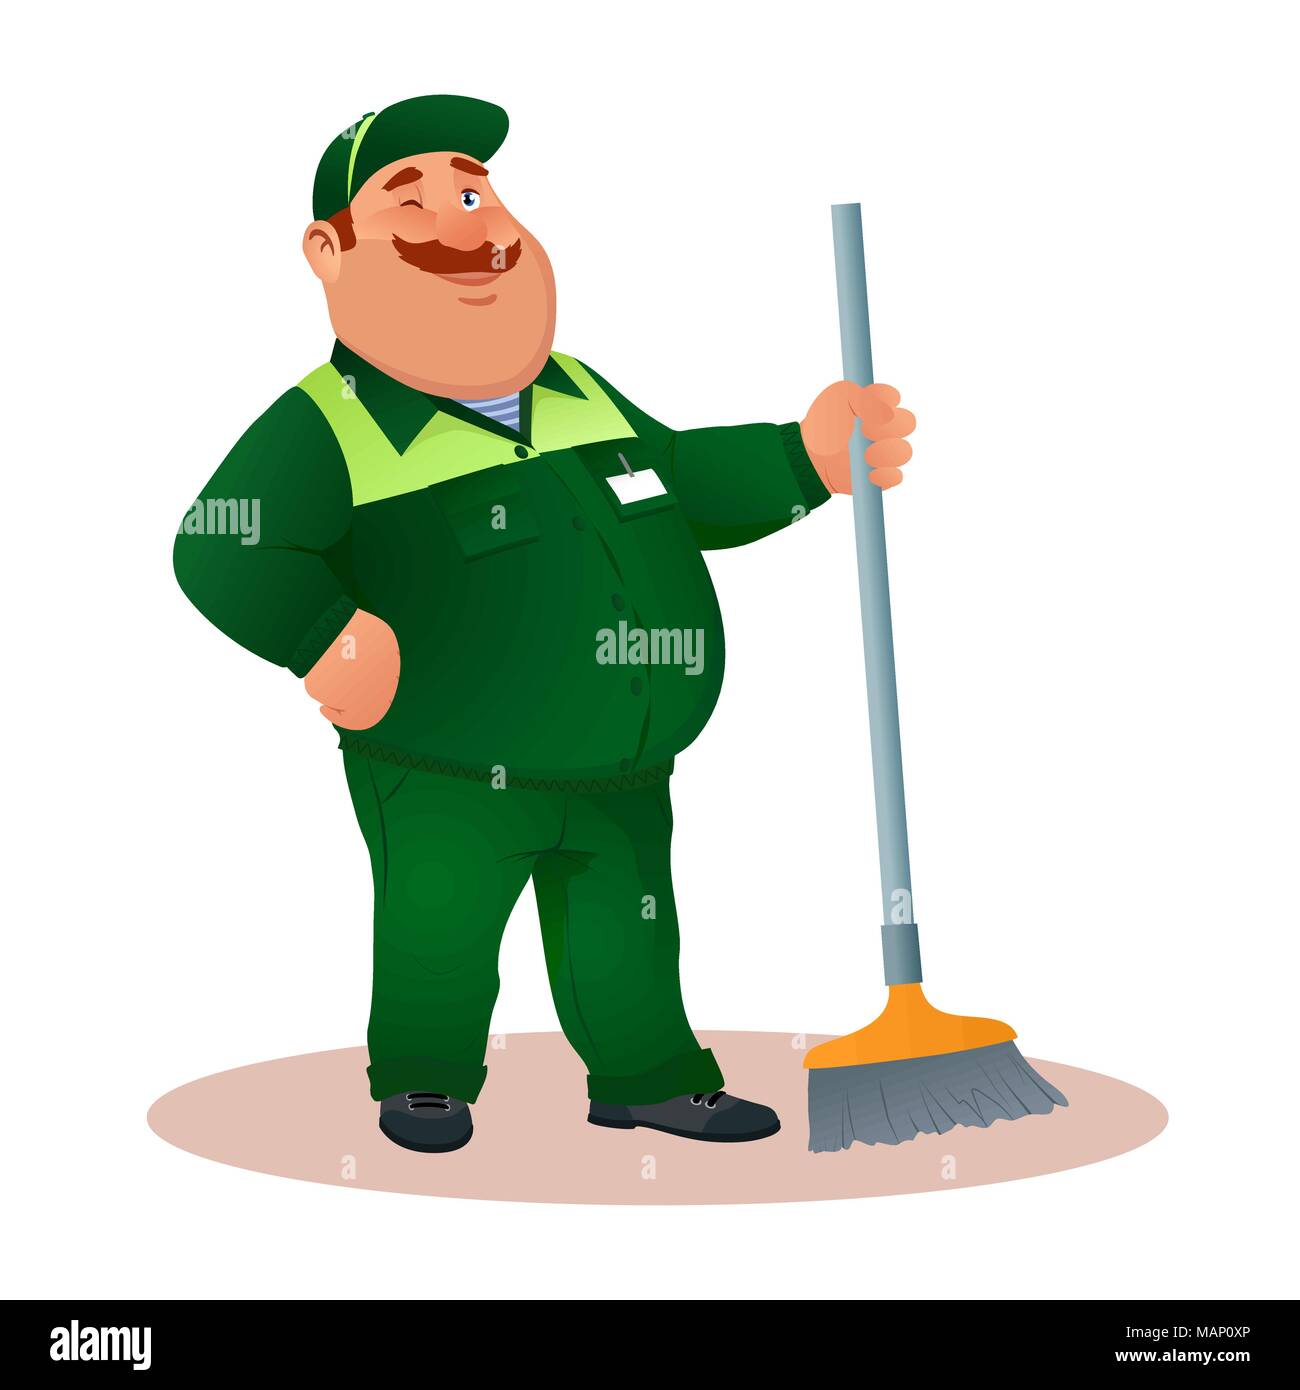 Smiling cartoon janitor with mop winks. Funny fat character in green suit with winking eye. Happy flat cleaner in uniform from janitorial service or office cleaning. Colorful vector illustration. Stock Vector